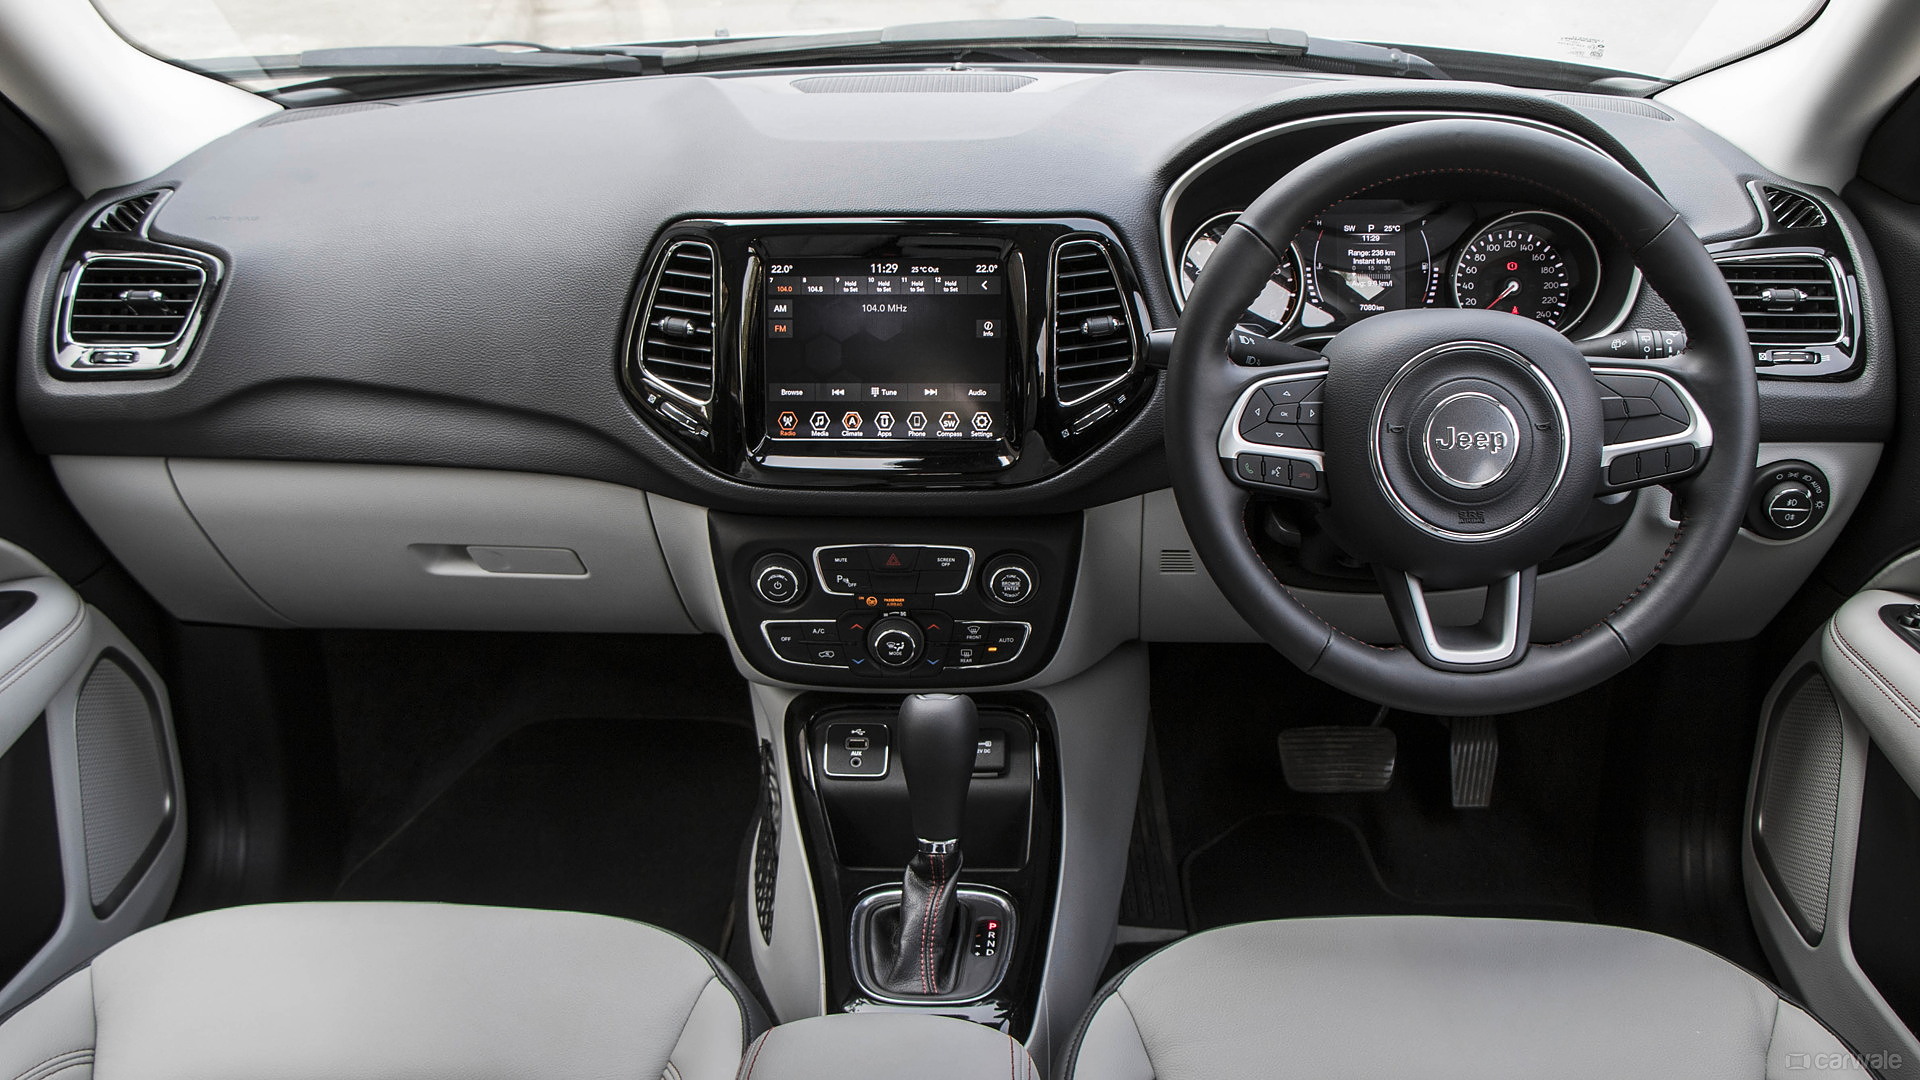 Jeep Compass Photo Interior Image Carwale